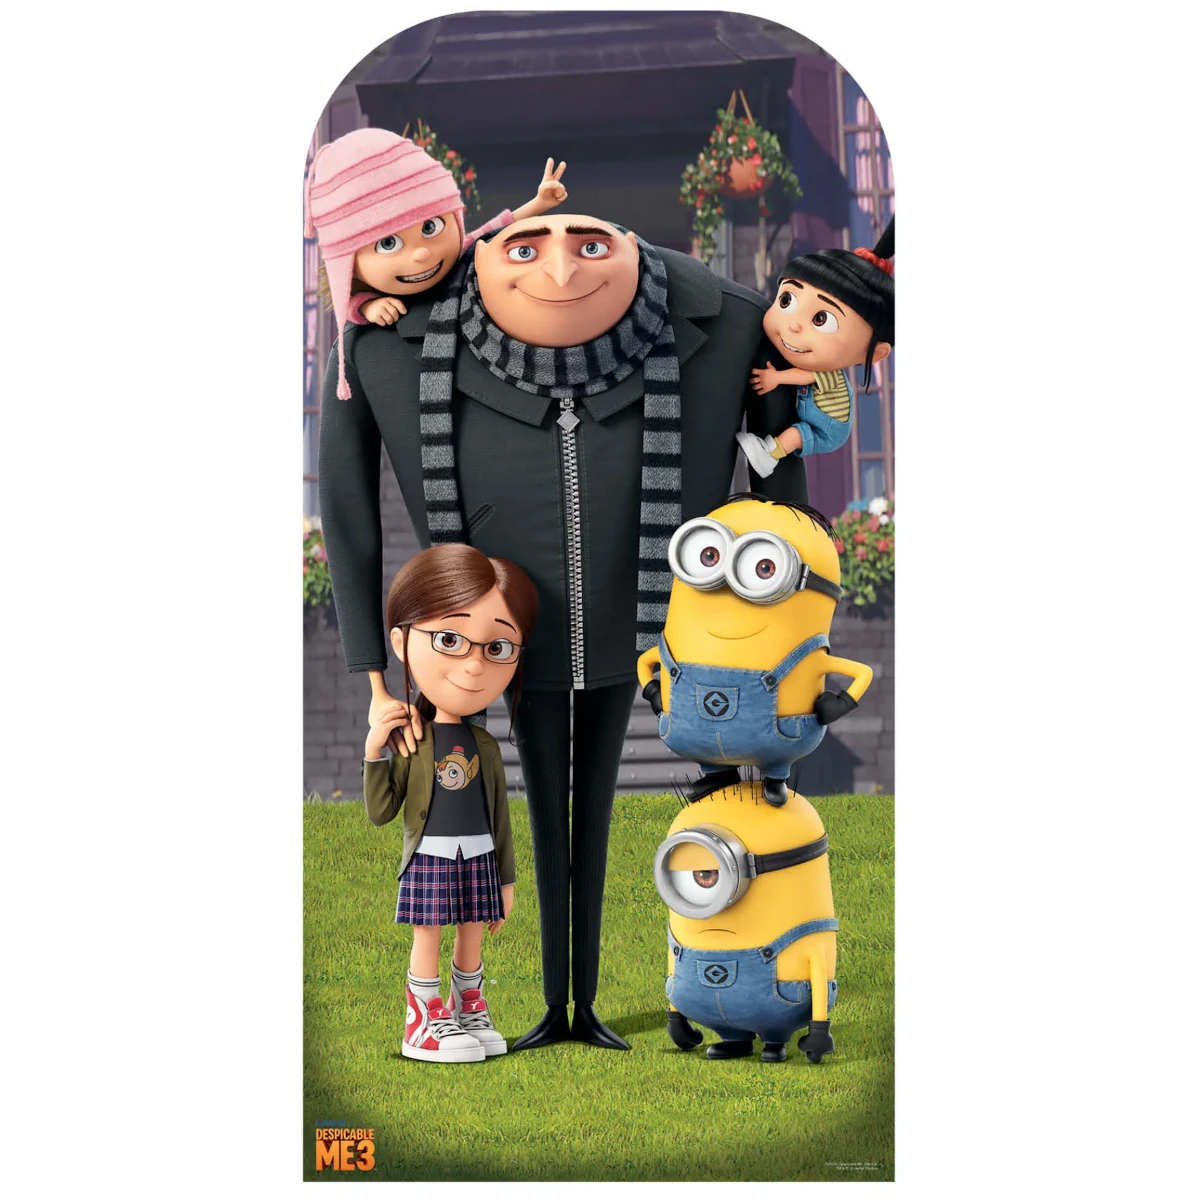 SC1045 Despicable Me 3 Official Adult Size Stand-In Cardboard Cutout Standee Front